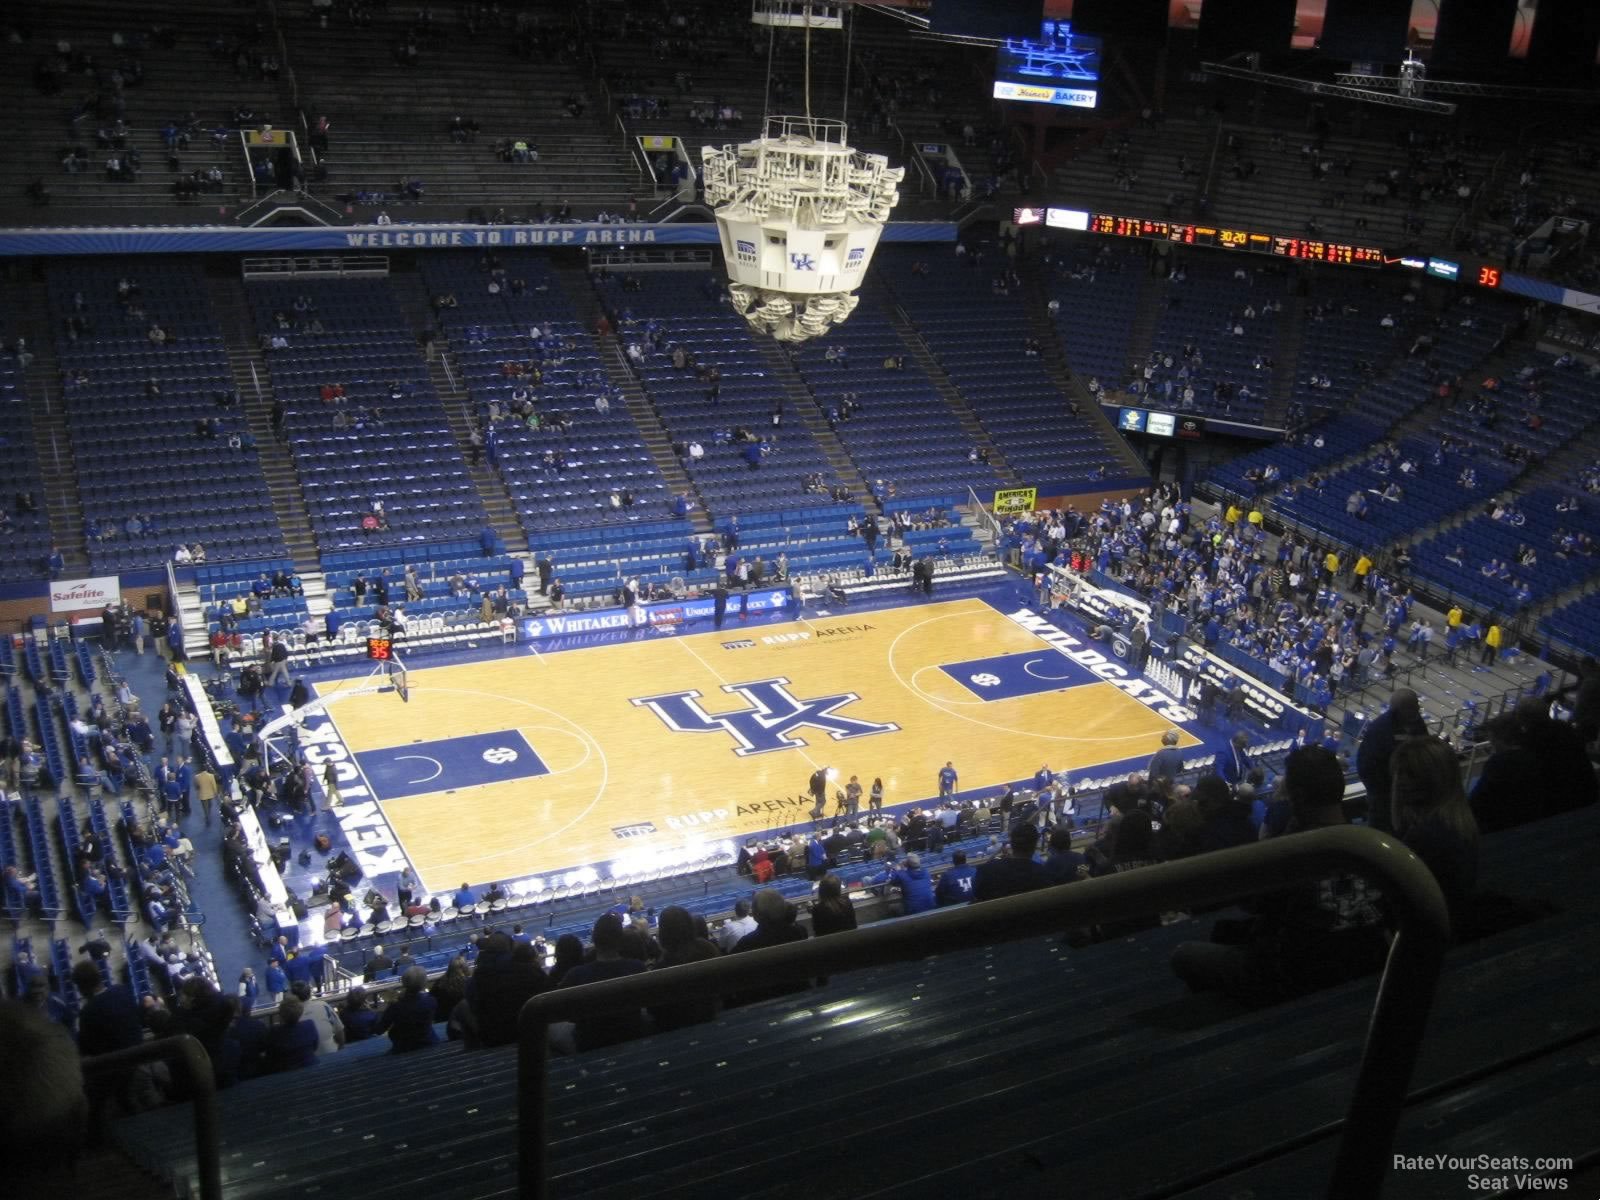 section 217, row cc seat view  for basketball - rupp arena